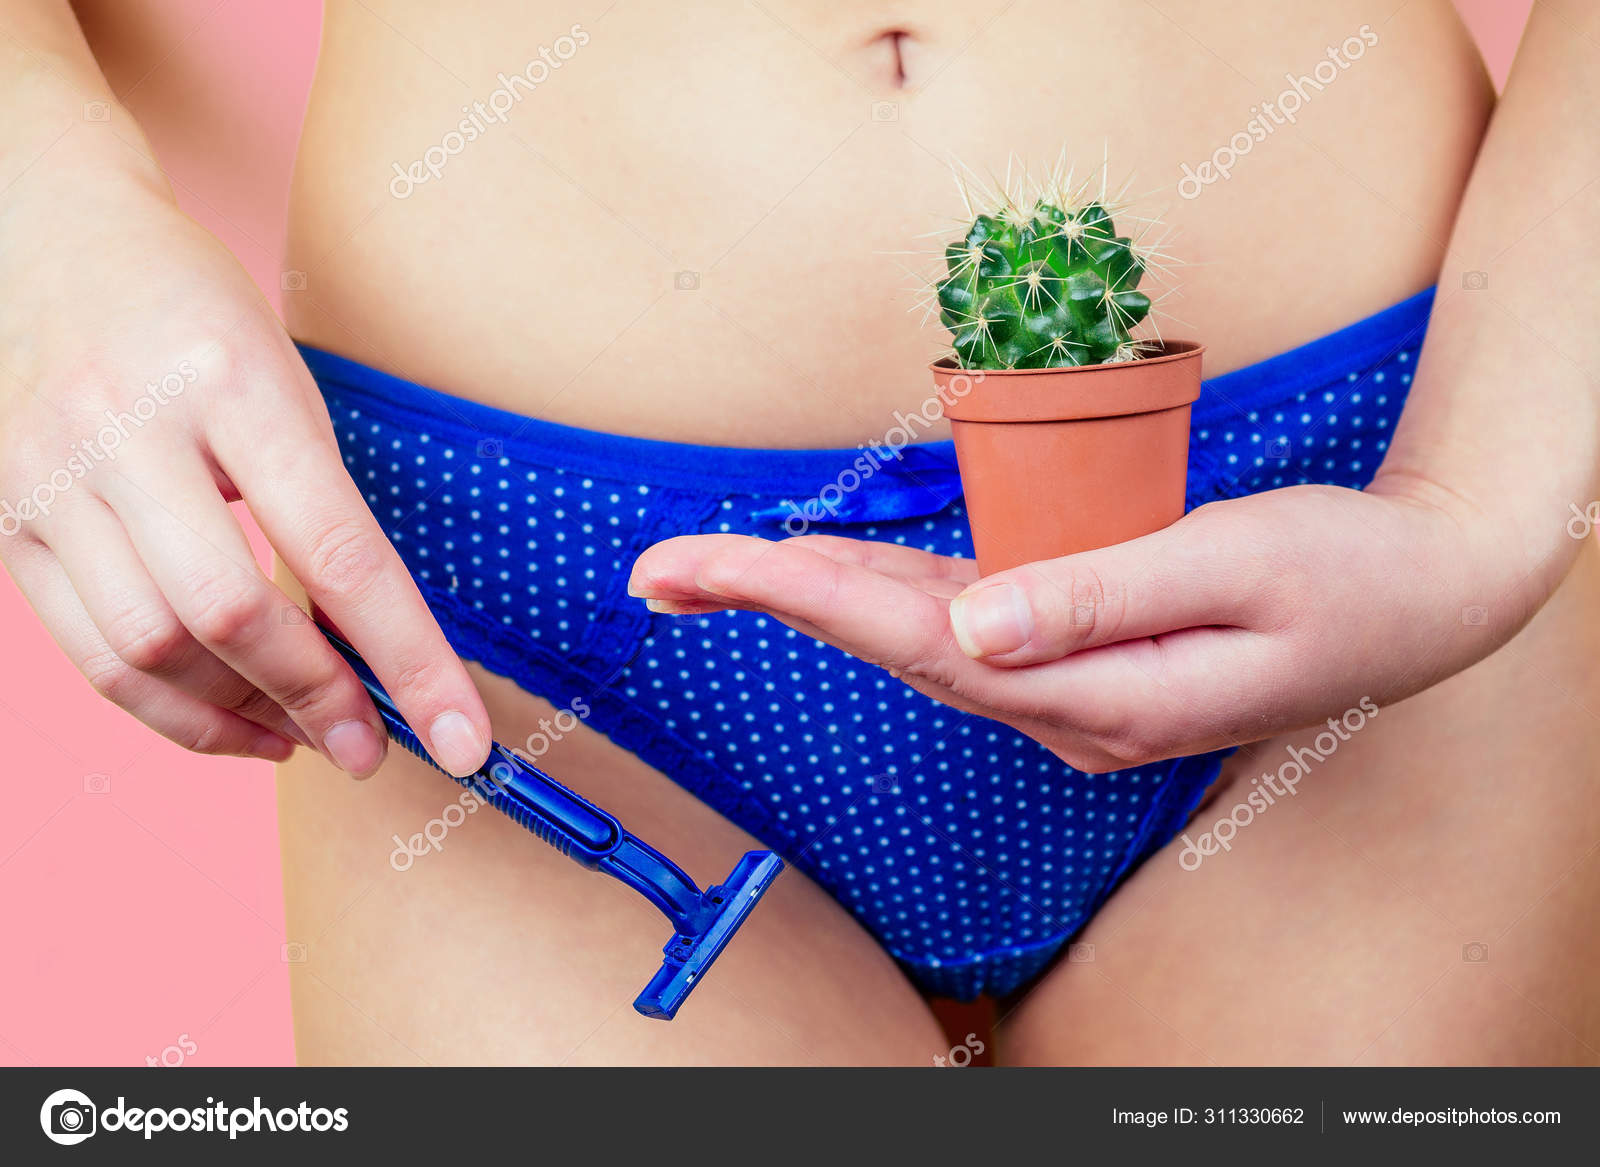 A woman in panties is holding a green cactus in a brown pot and a razor